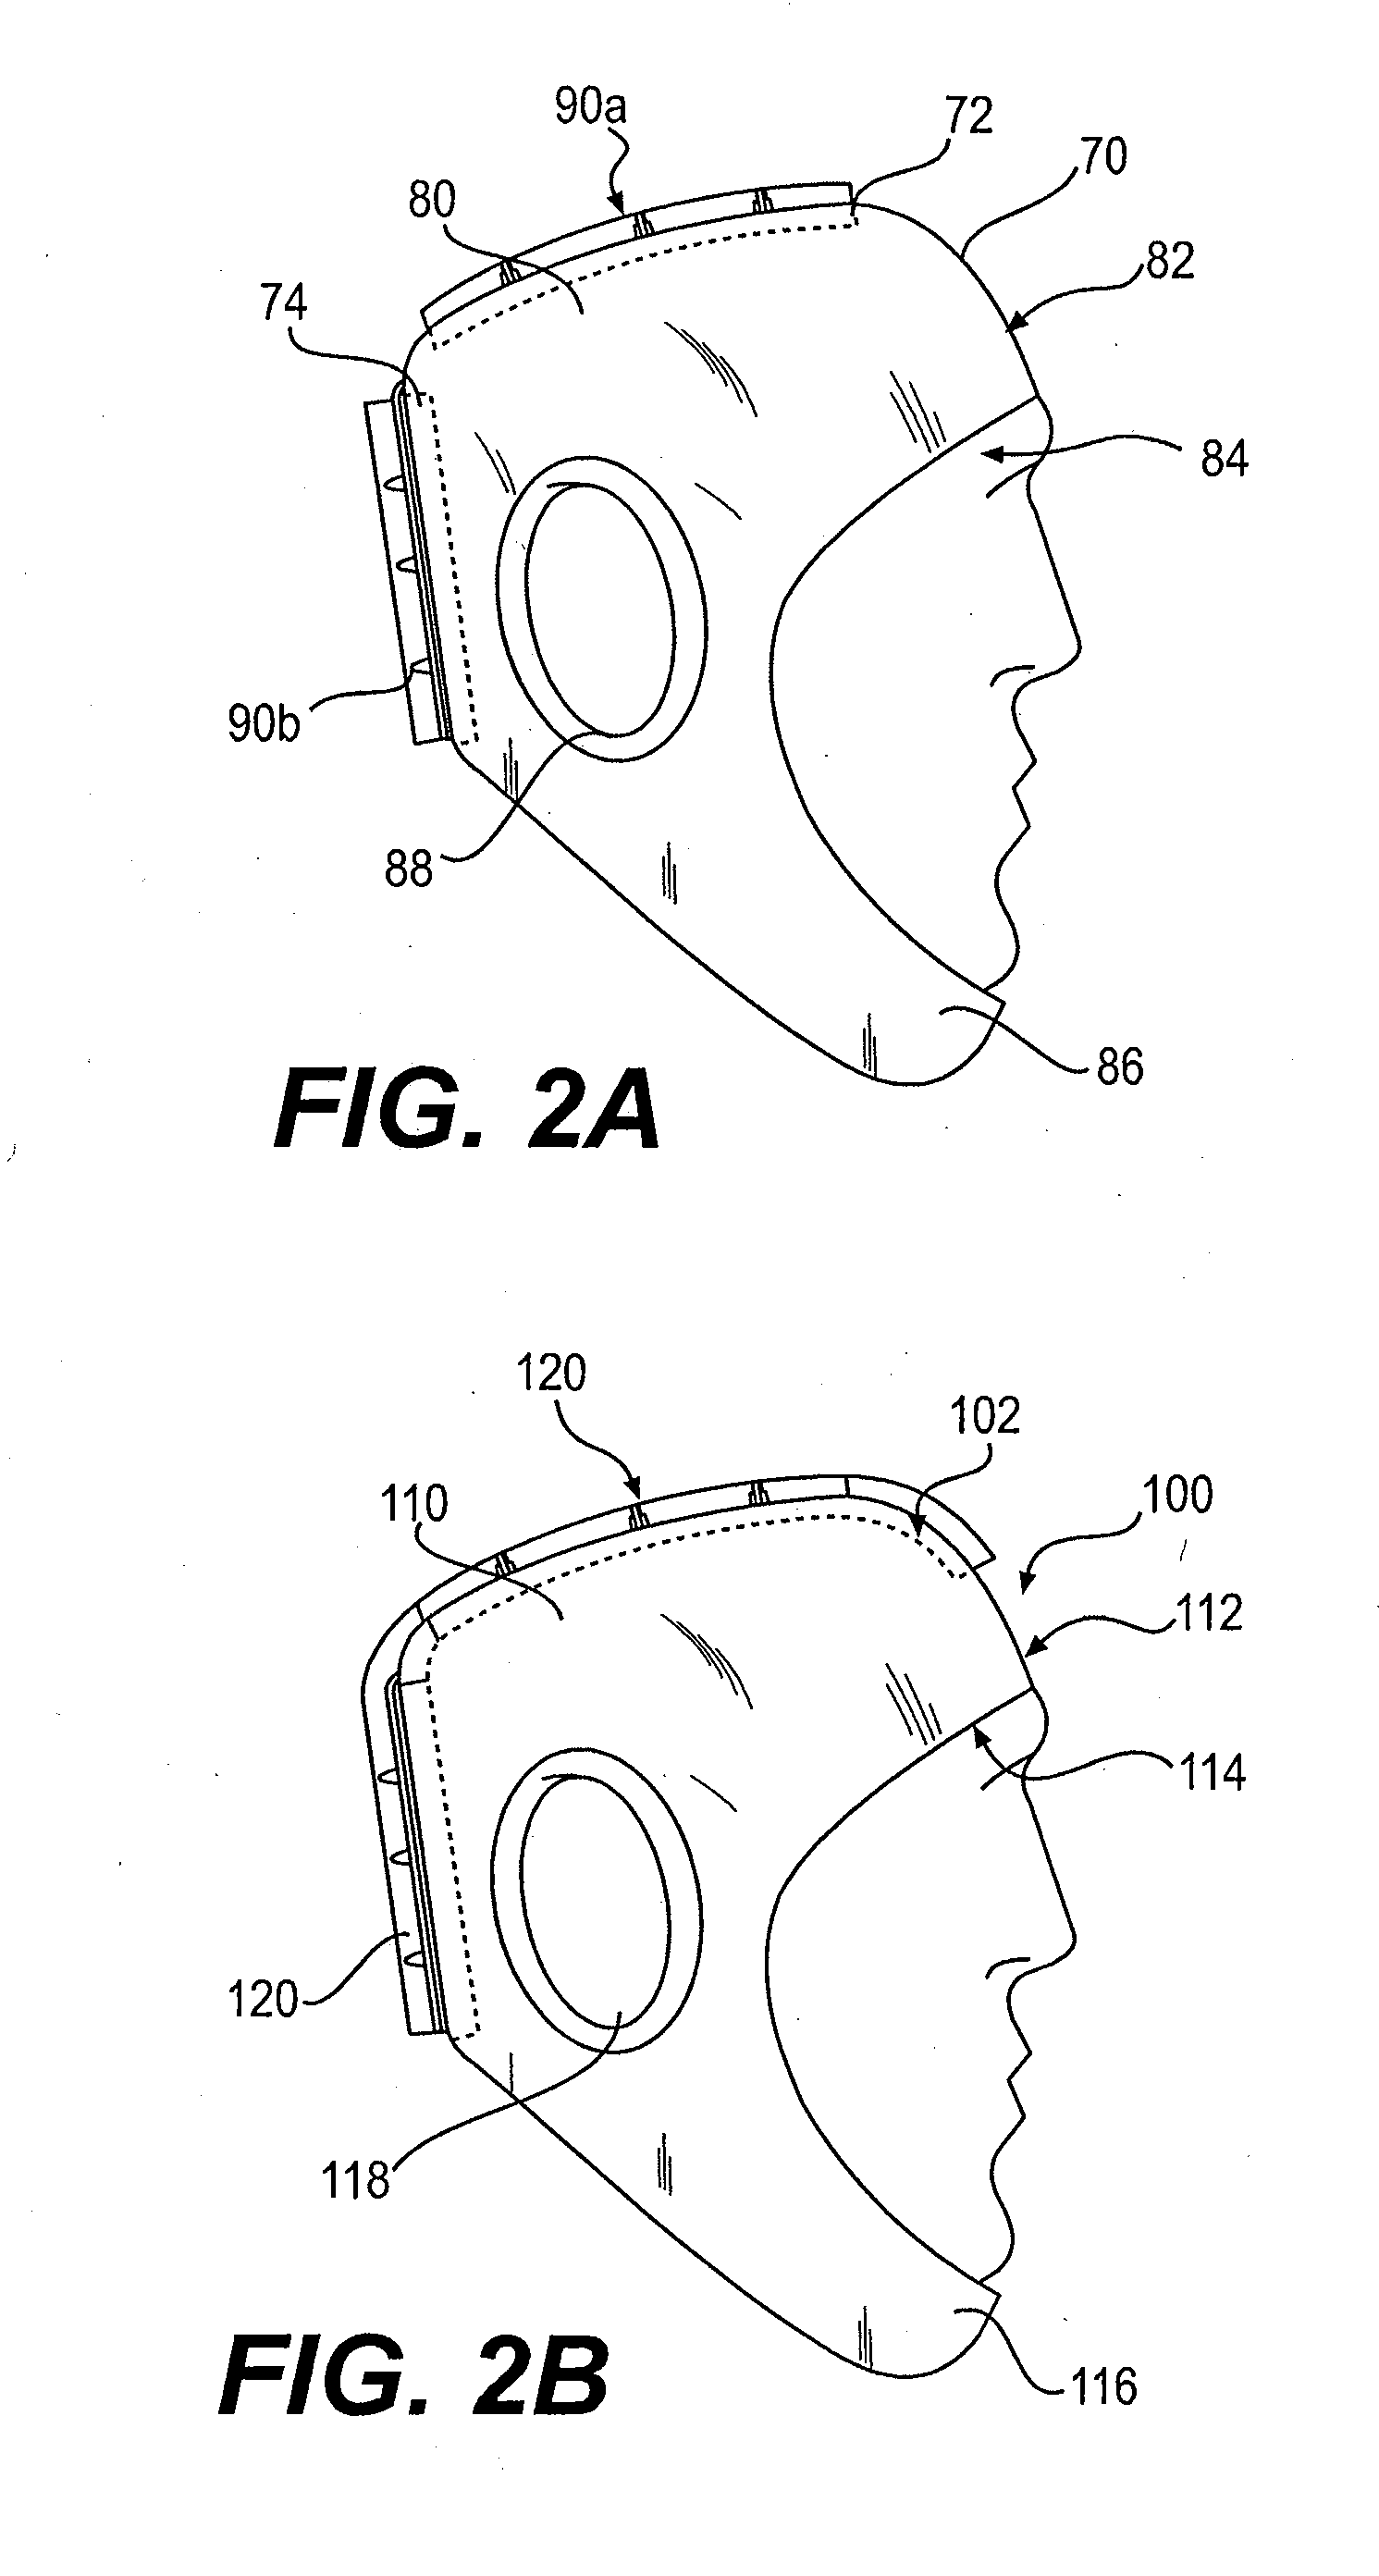 Apparatus and Method for Cooling Head Injury